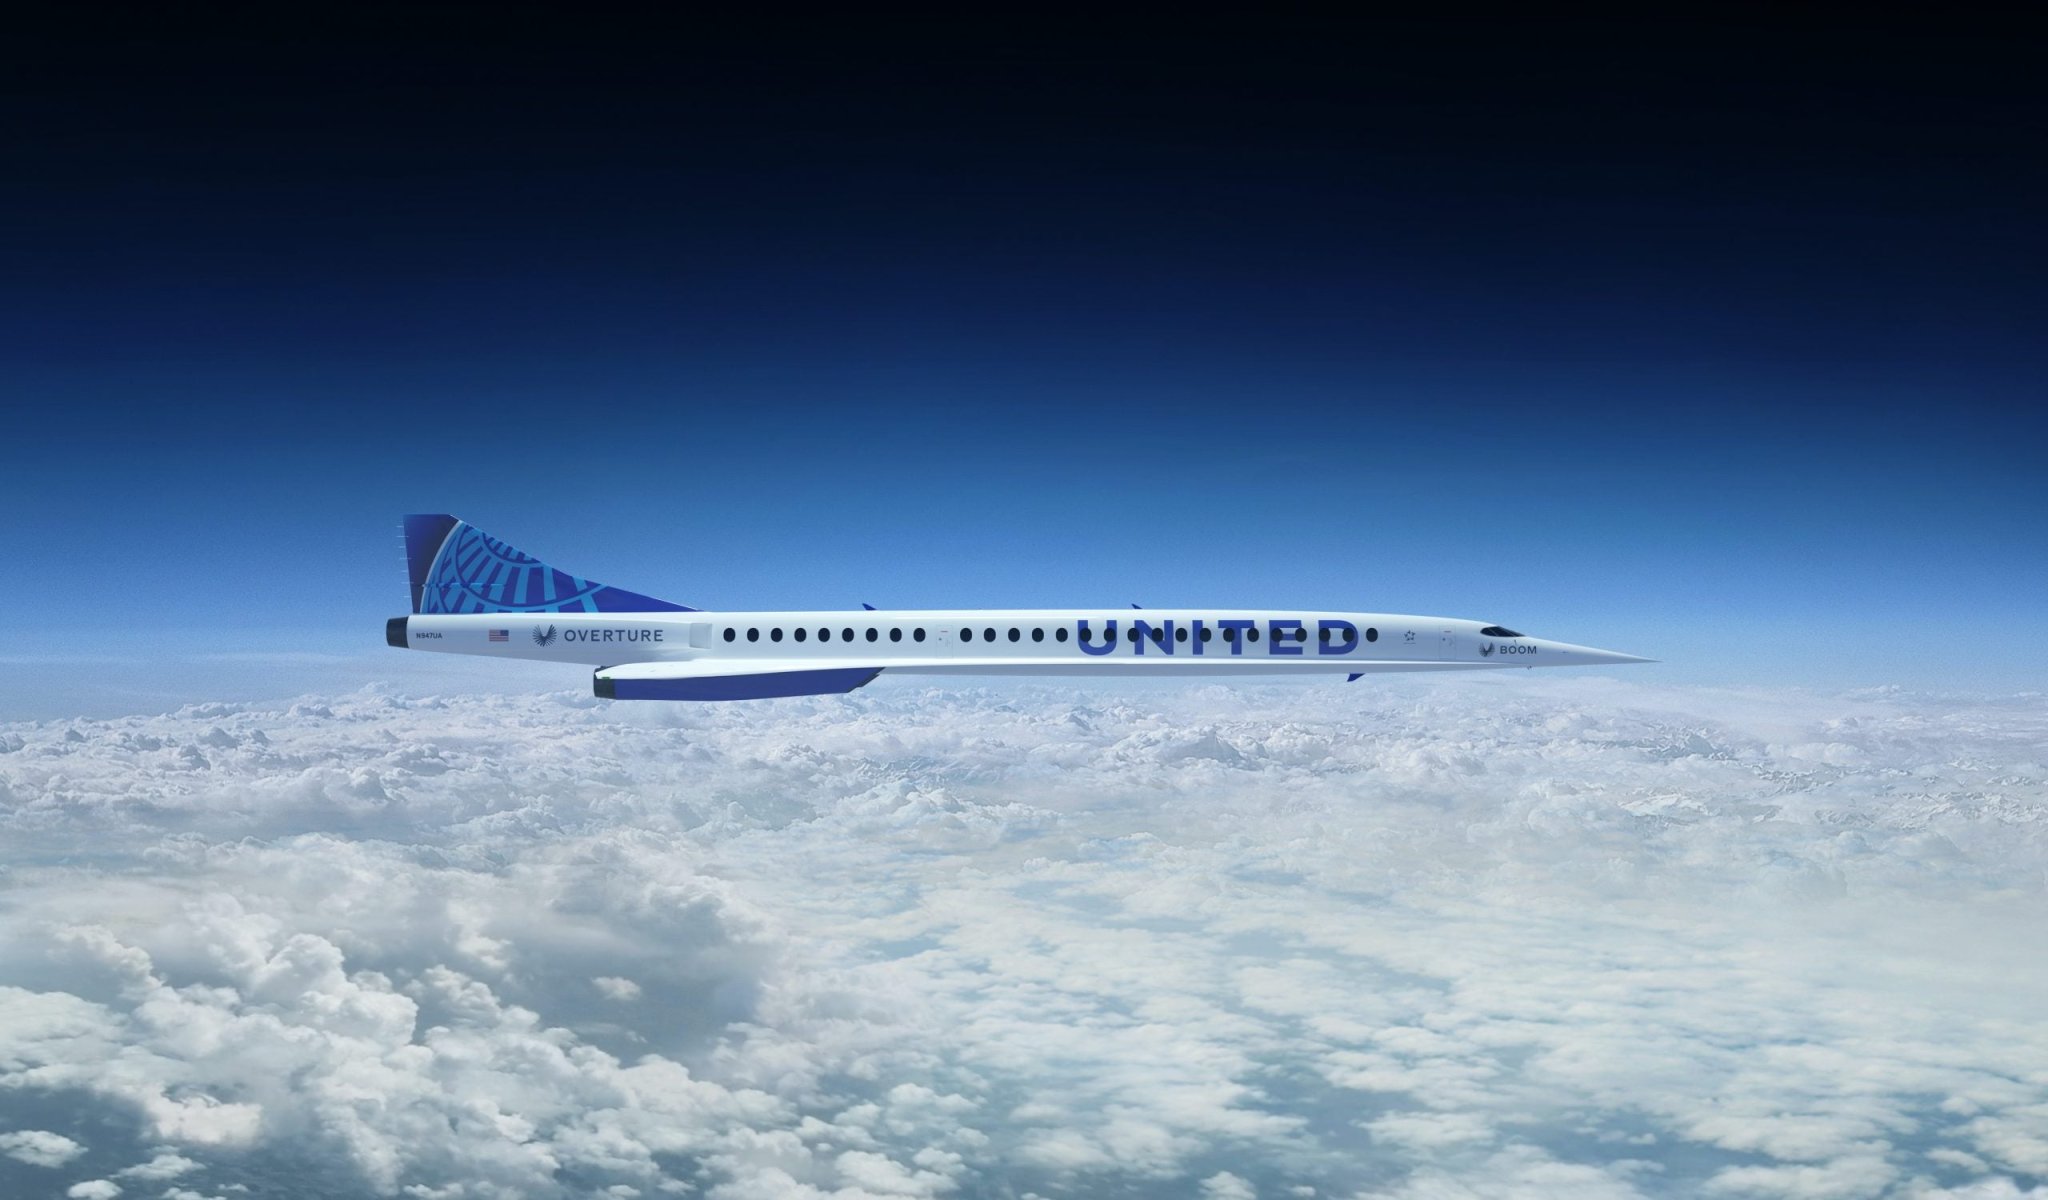 United Airlines announces deal with Boom Supersonic for faster-than-sound commercial flights